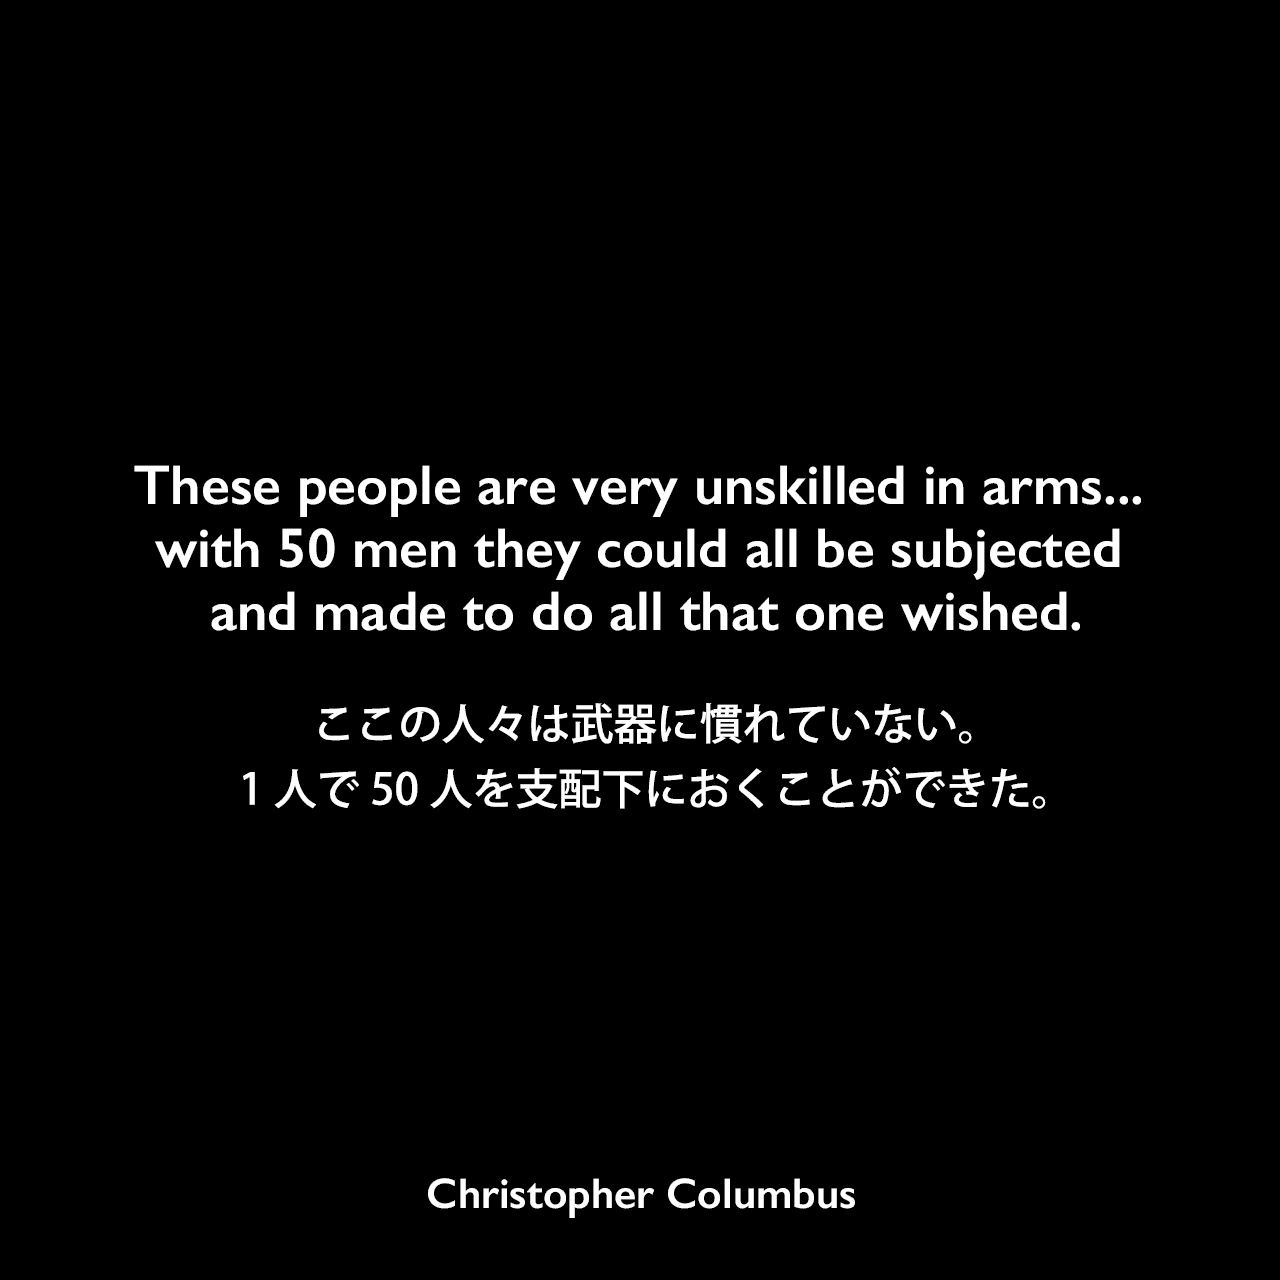 These people are very unskilled in arms... with 50 men they could all be subjected and made to do all that one wished.ここの人々は武器に慣れていない。1人で50人を支配下におくことができた。Christopher Columbus